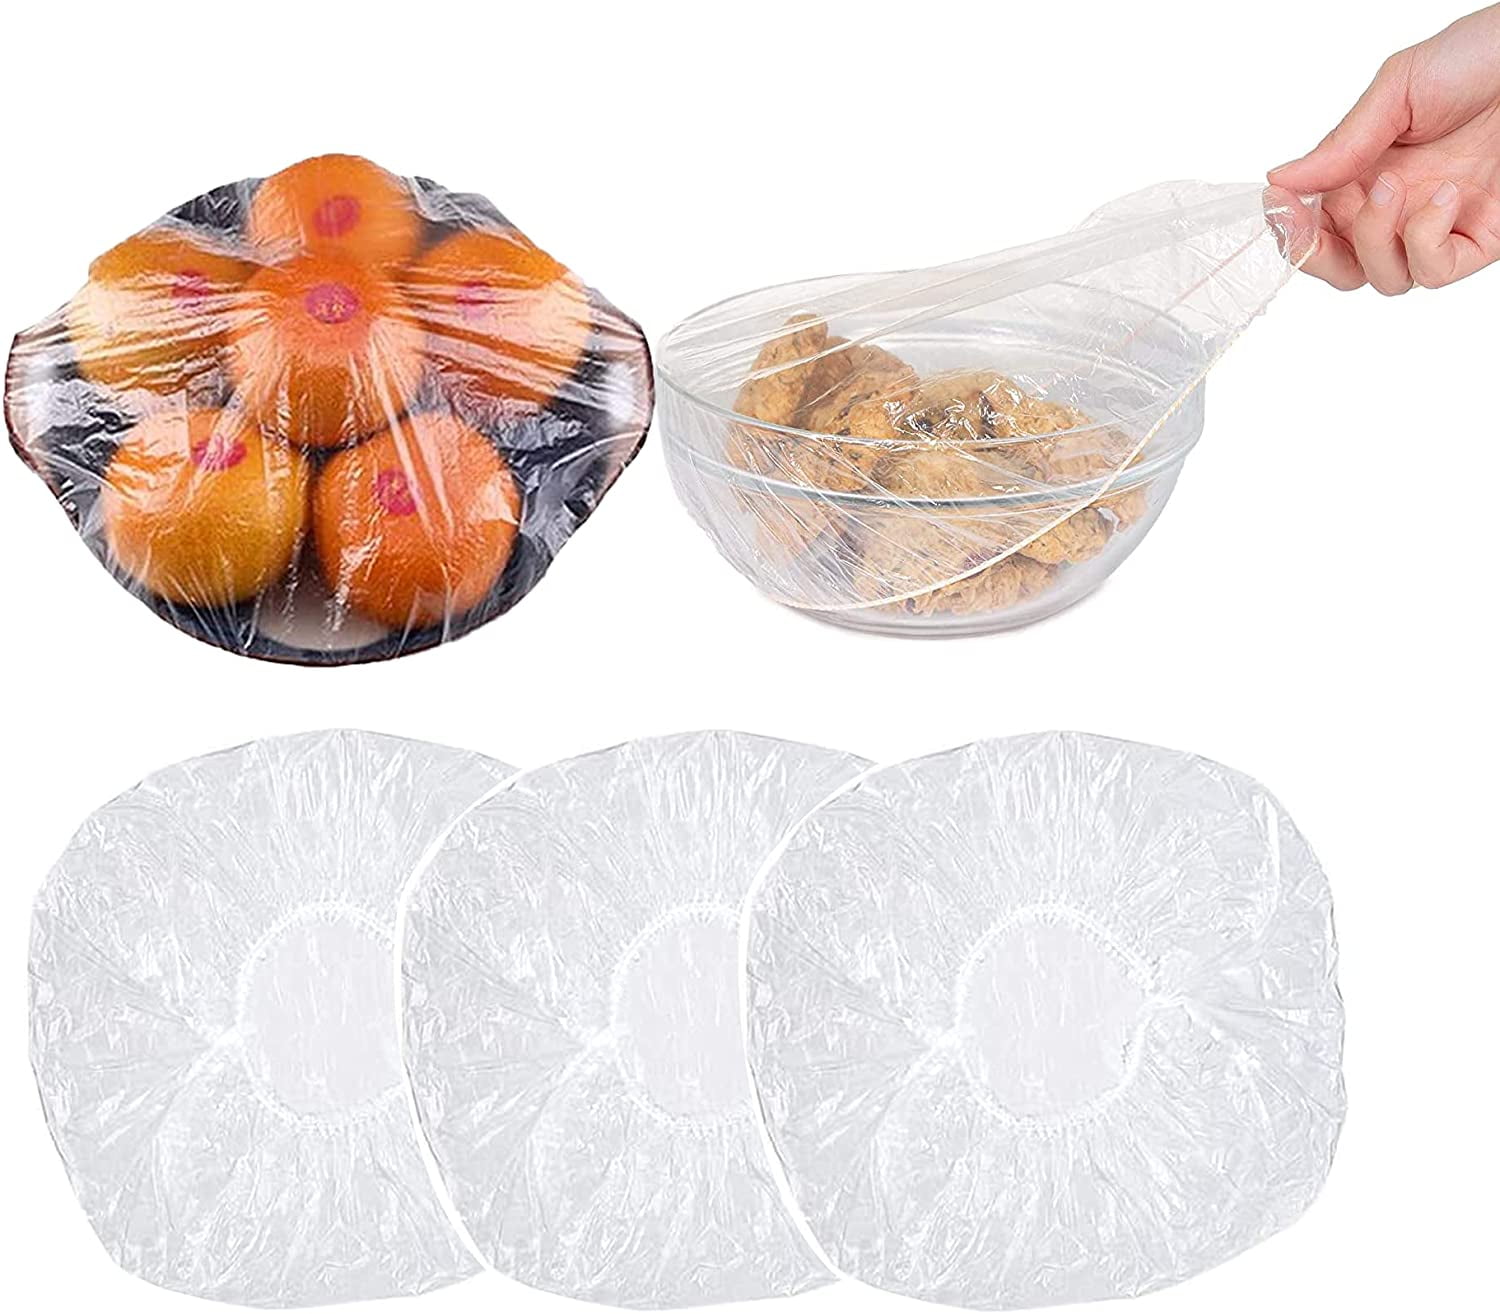 100 Reusable Elastic Food Storage Covers, Stretchable Plastic Wrap Bowl  Covers with Elastic Edging, Covers for Storage Containers for Bowl Dish  Plate